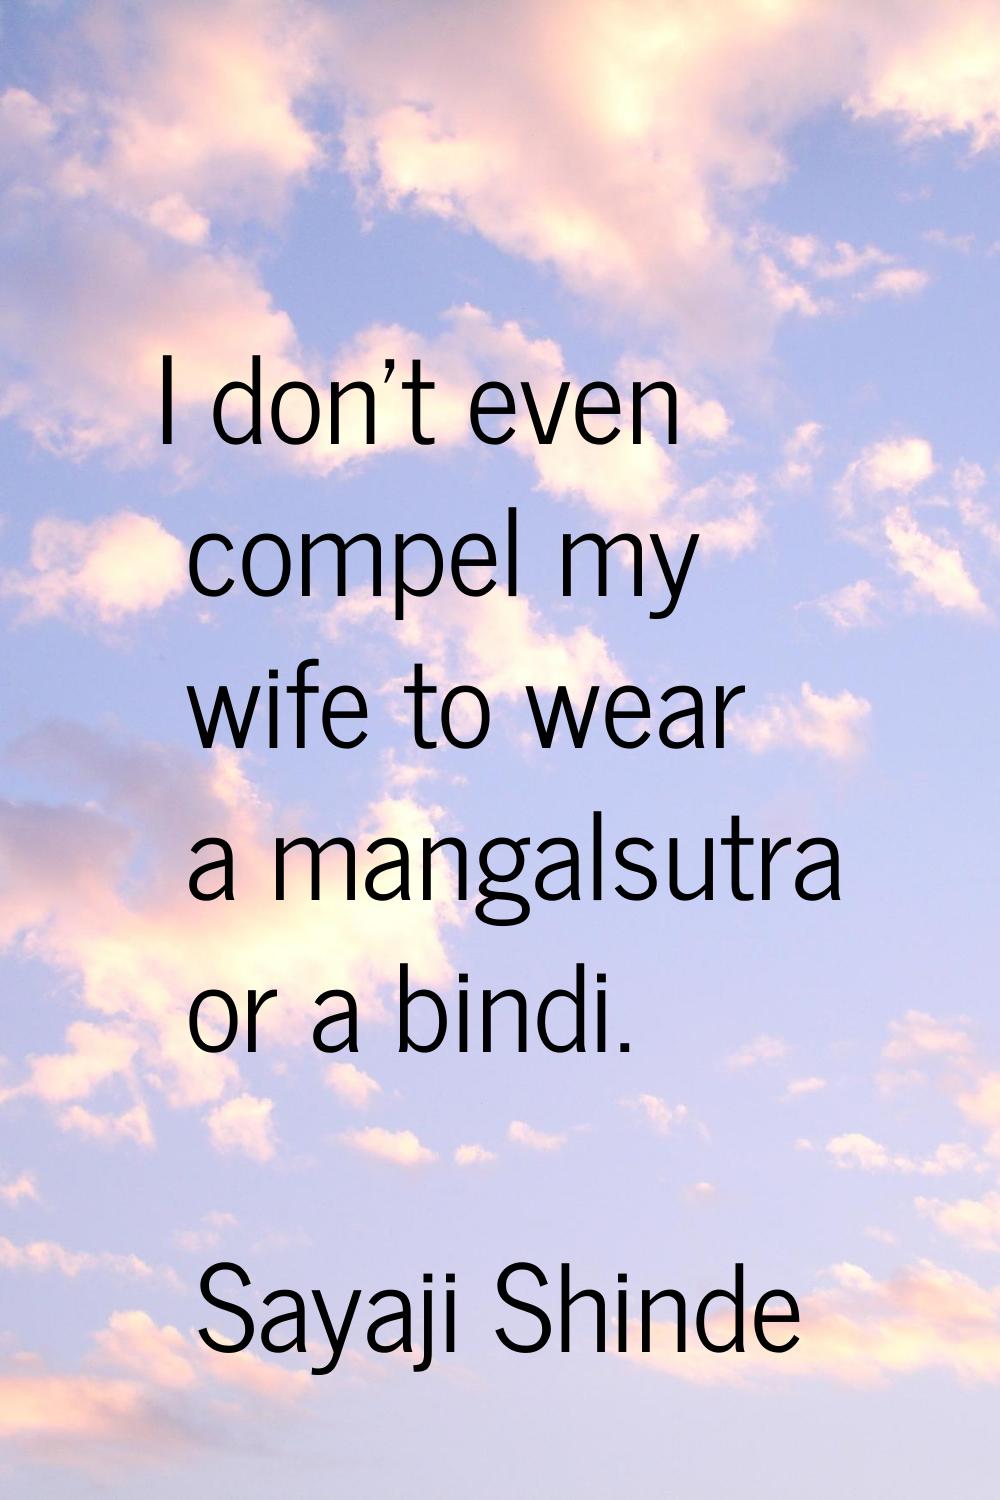 I don't even compel my wife to wear a mangalsutra or a bindi.